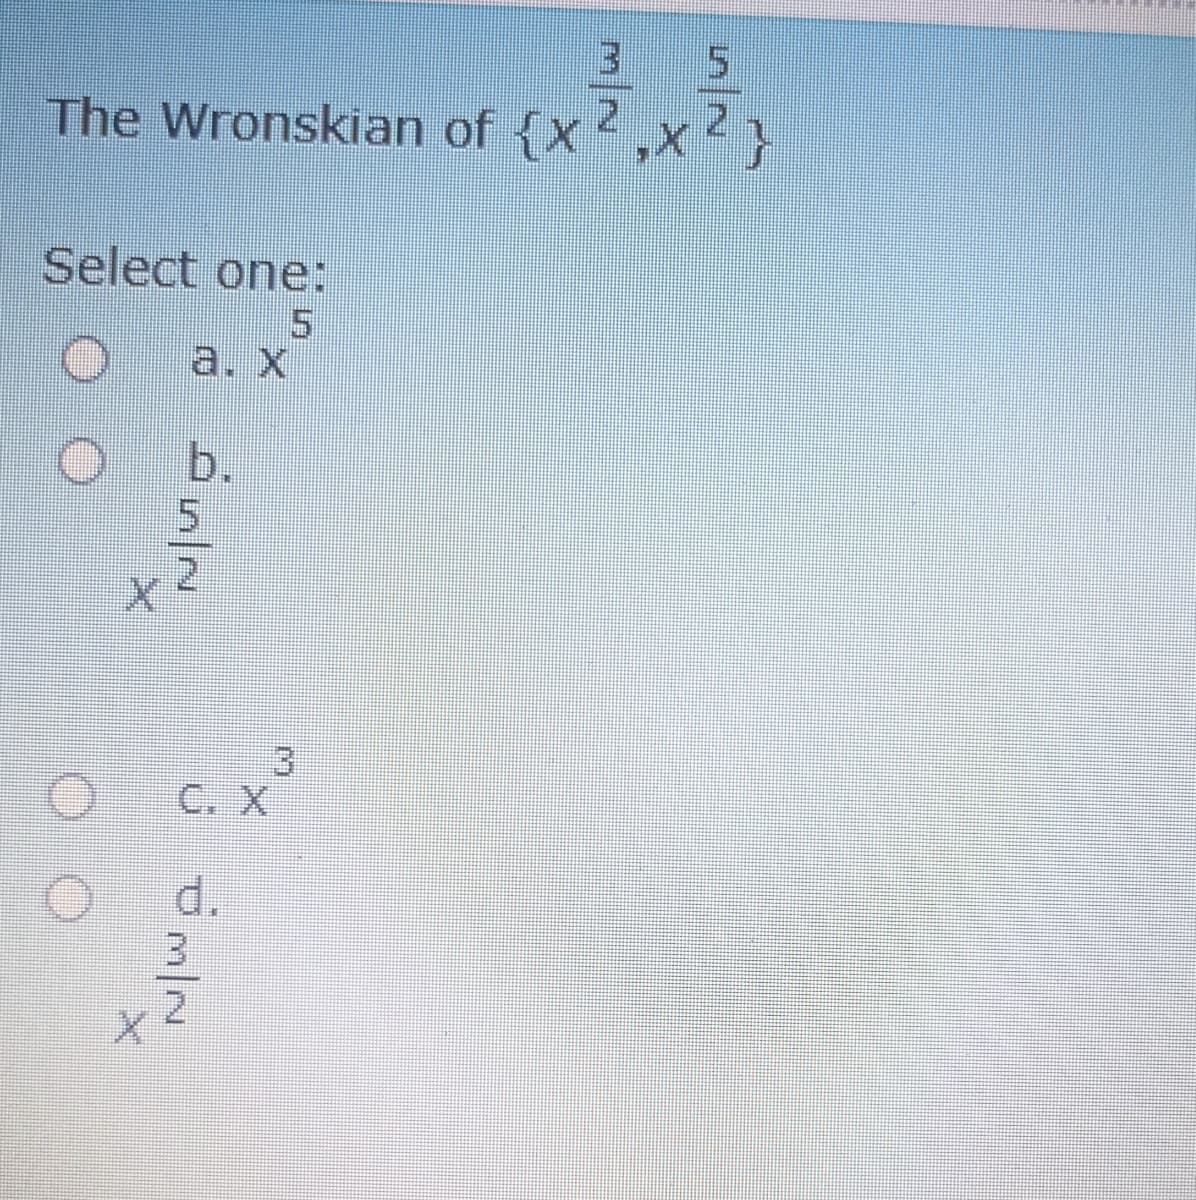 3 5
2.
The Wronskian of {x,x}
Select one:
5.
a. X
b.
2.
C. X
d.
